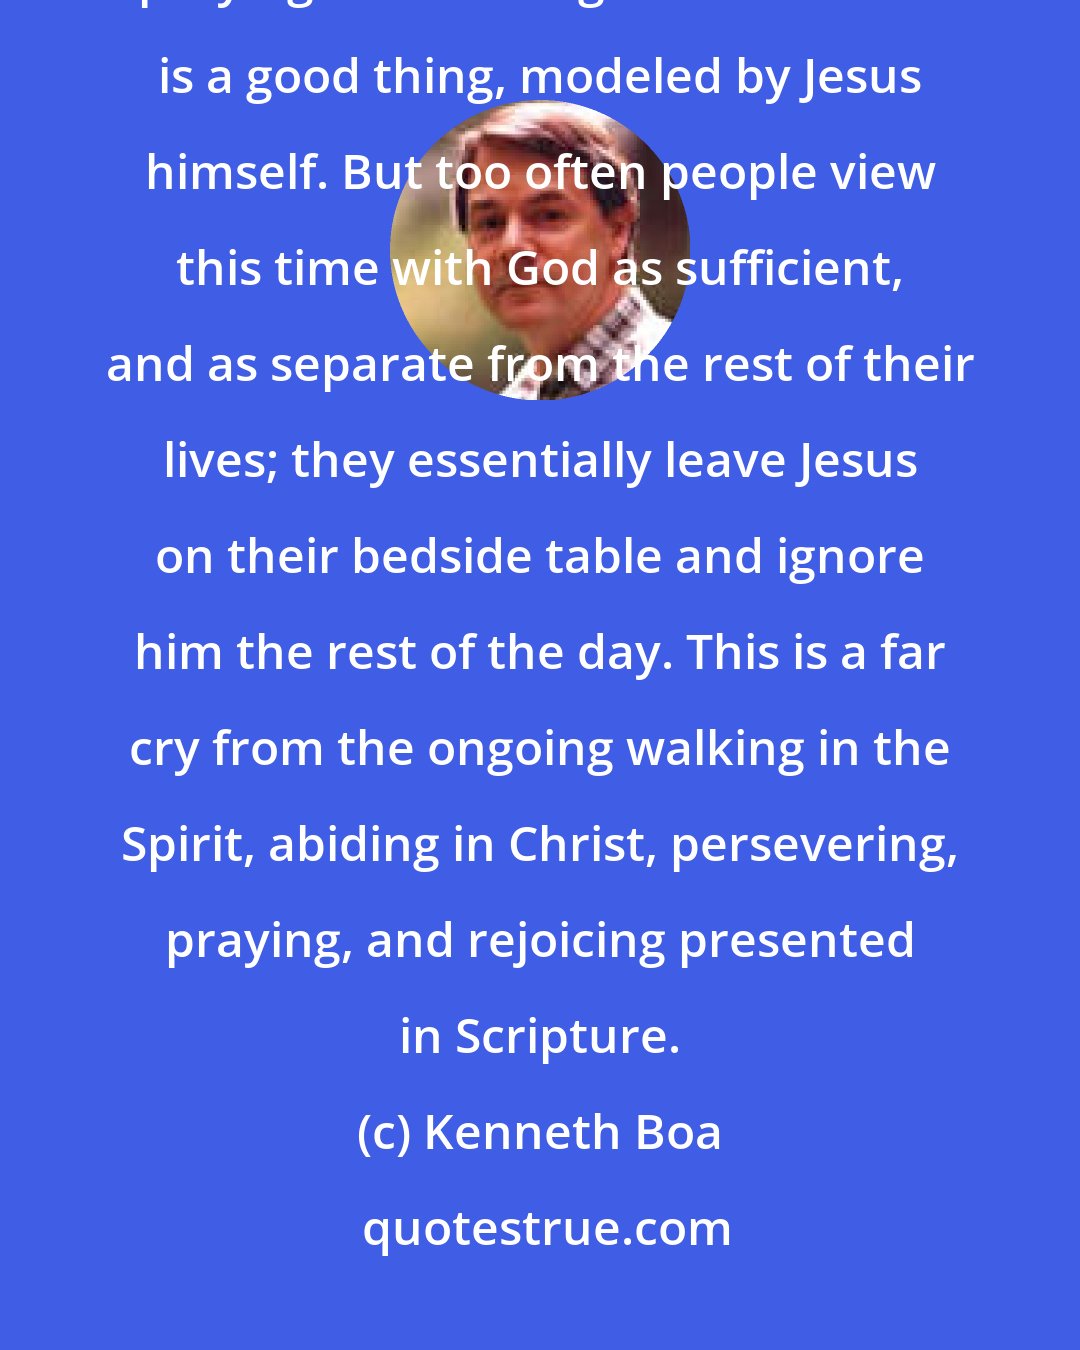 Kenneth Boa: Believers are often encouraged to spend some time each day alone praying and reading the Bible. This is a good thing, modeled by Jesus himself. But too often people view this time with God as sufficient, and as separate from the rest of their lives; they essentially leave Jesus on their bedside table and ignore him the rest of the day. This is a far cry from the ongoing walking in the Spirit, abiding in Christ, persevering, praying, and rejoicing presented in Scripture.